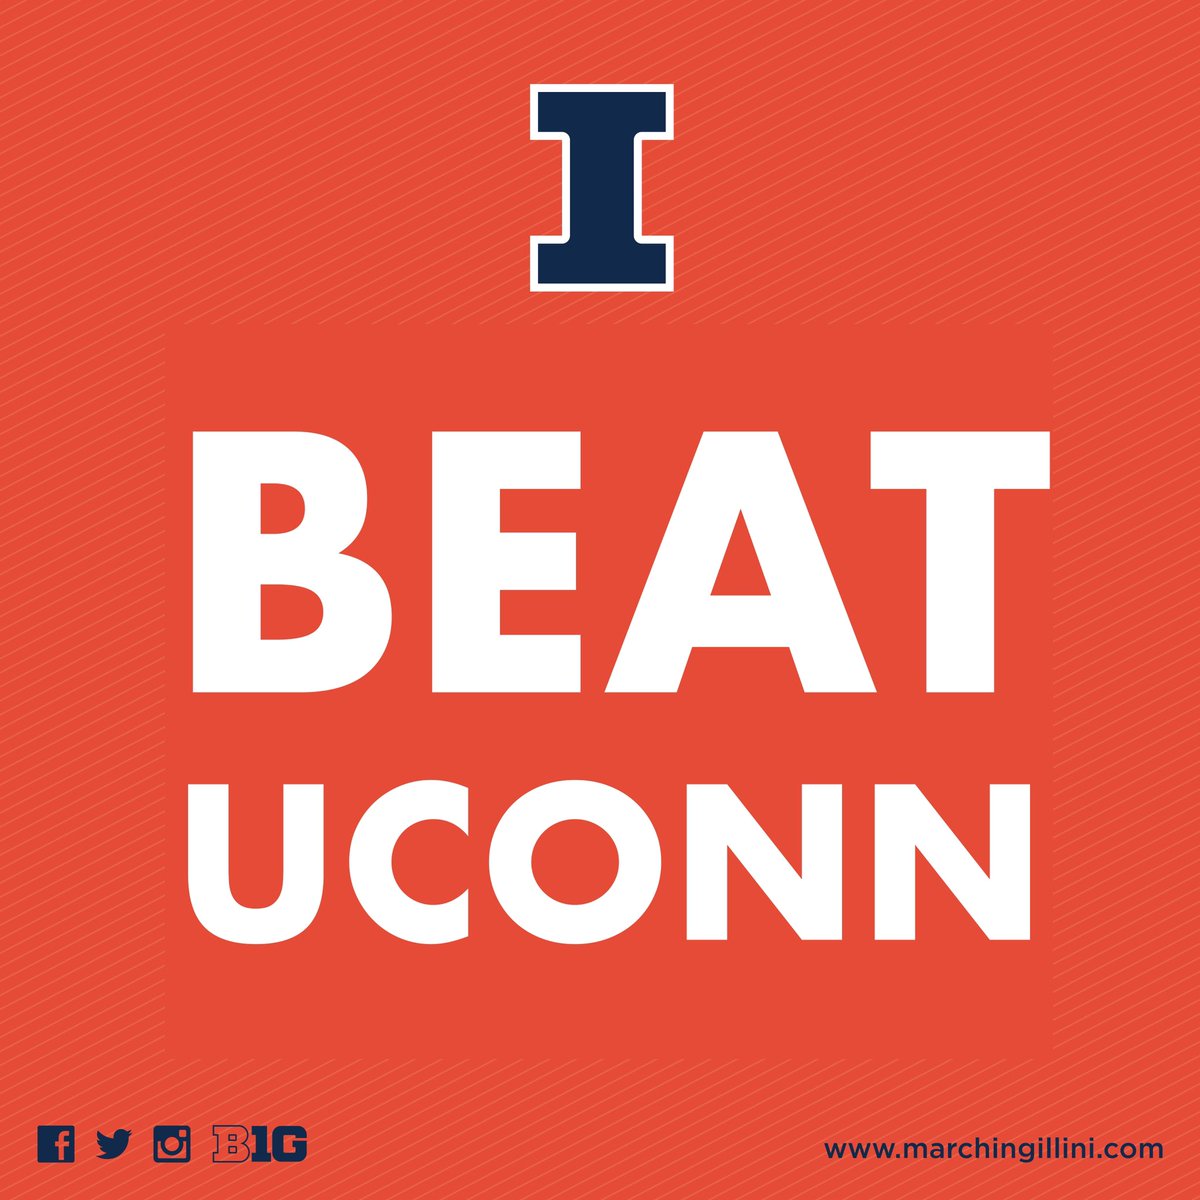 BEAT UCONN! That is all! 🔶🔷💯🏀